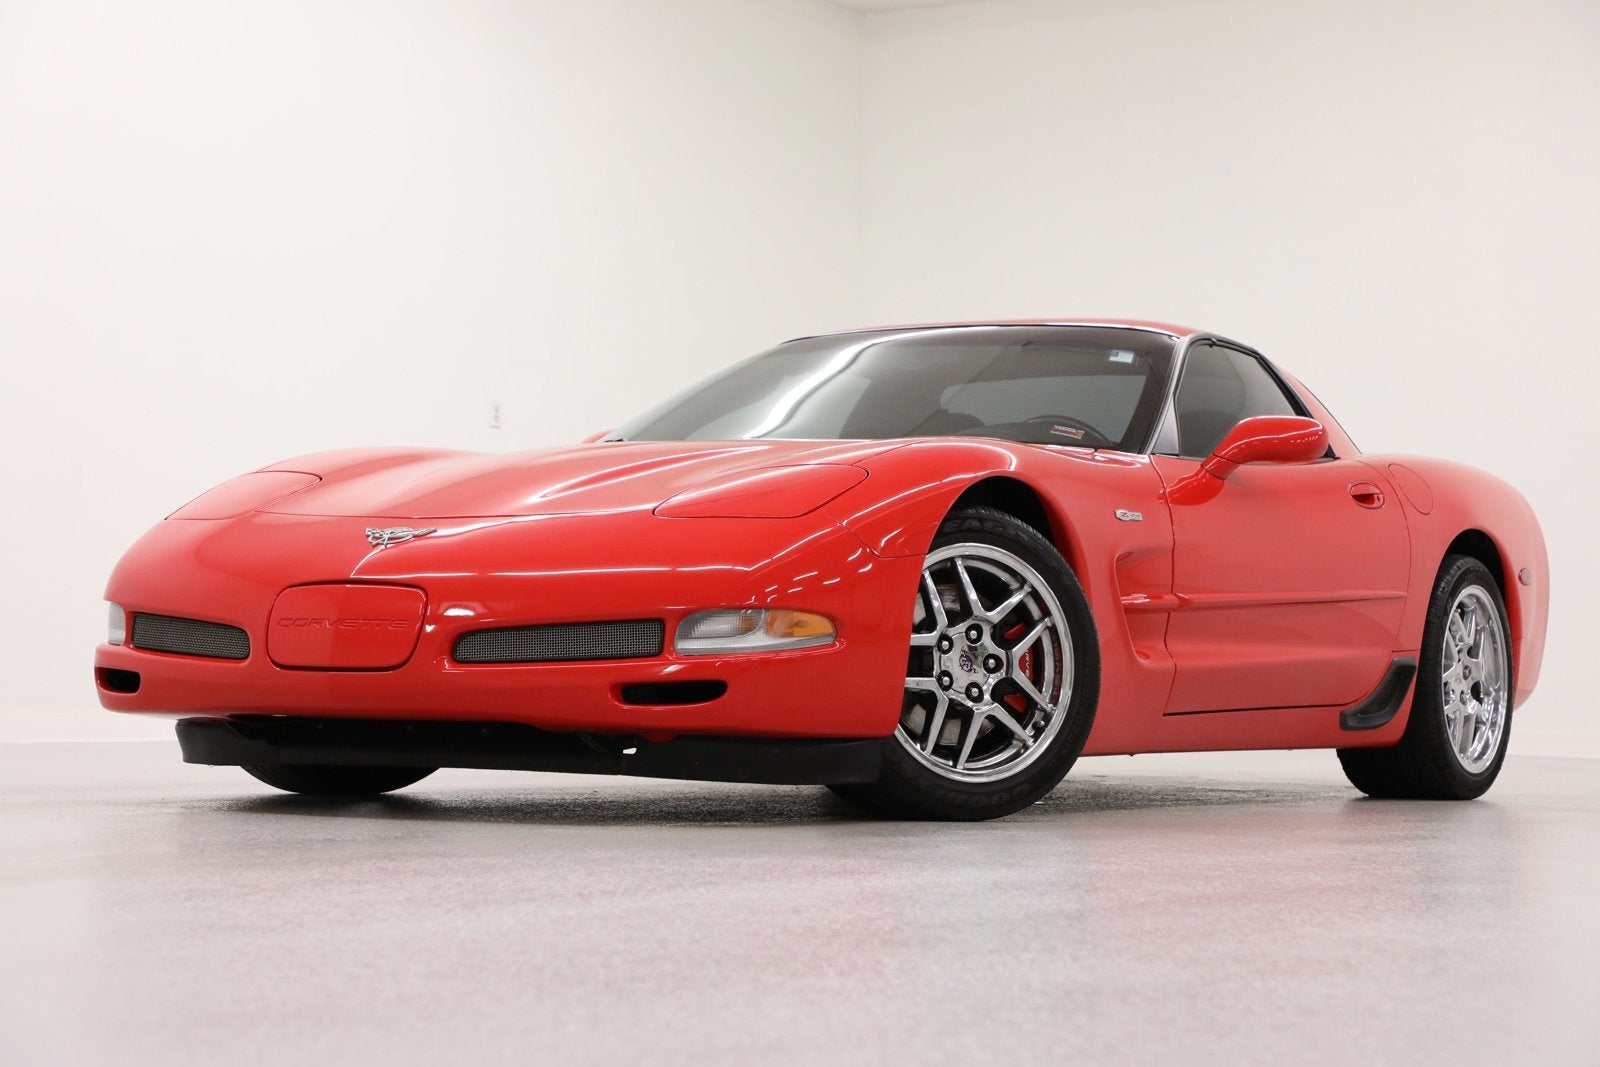 2003 Chevrolet Corvette Z06 5.7L V8 Head Up Display Memory Cruise Bose Dual Zone AC Low Mileage Clean Carfax